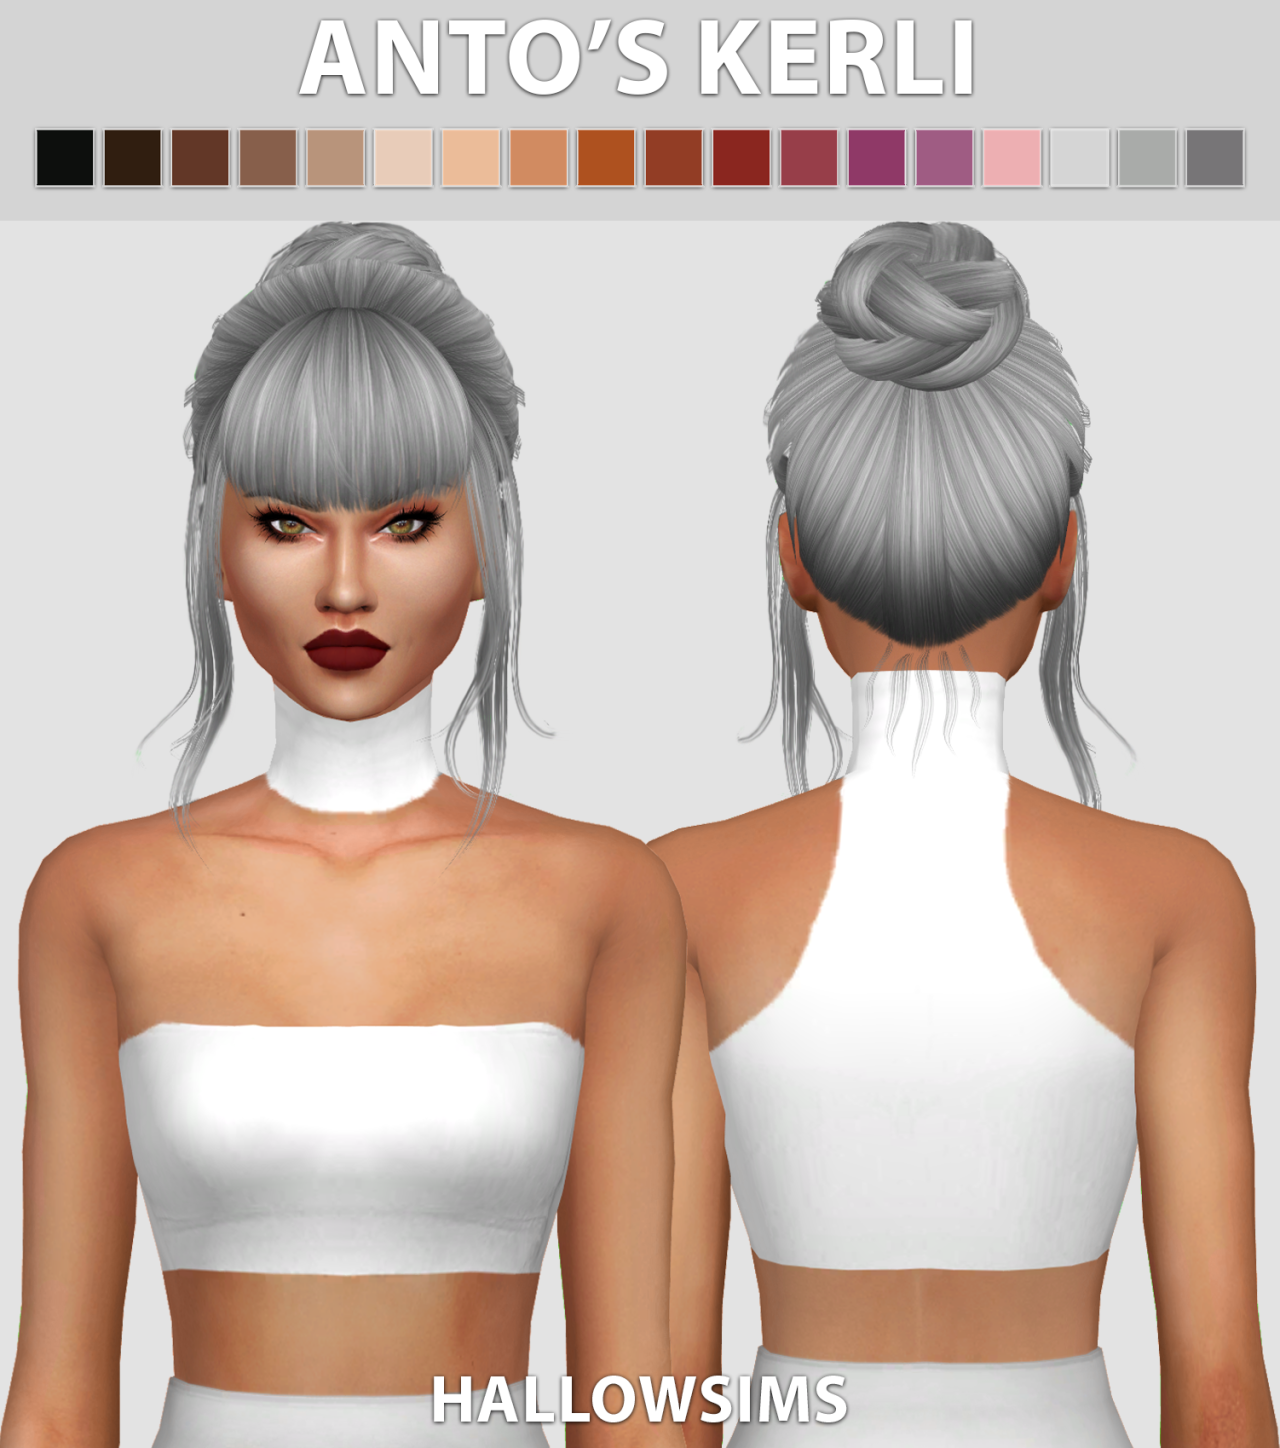 Anto’s Kerli
- Comes in 18 colours
- Smooth bone assignment.
- Hat compatible.
- All LOD’s.
- Few transparency issues.
- Mesh credits to Anto
Download Anto’s Kerli
Request by @breathingfarts ♥
CC used from @simpliciaty
- Caesar